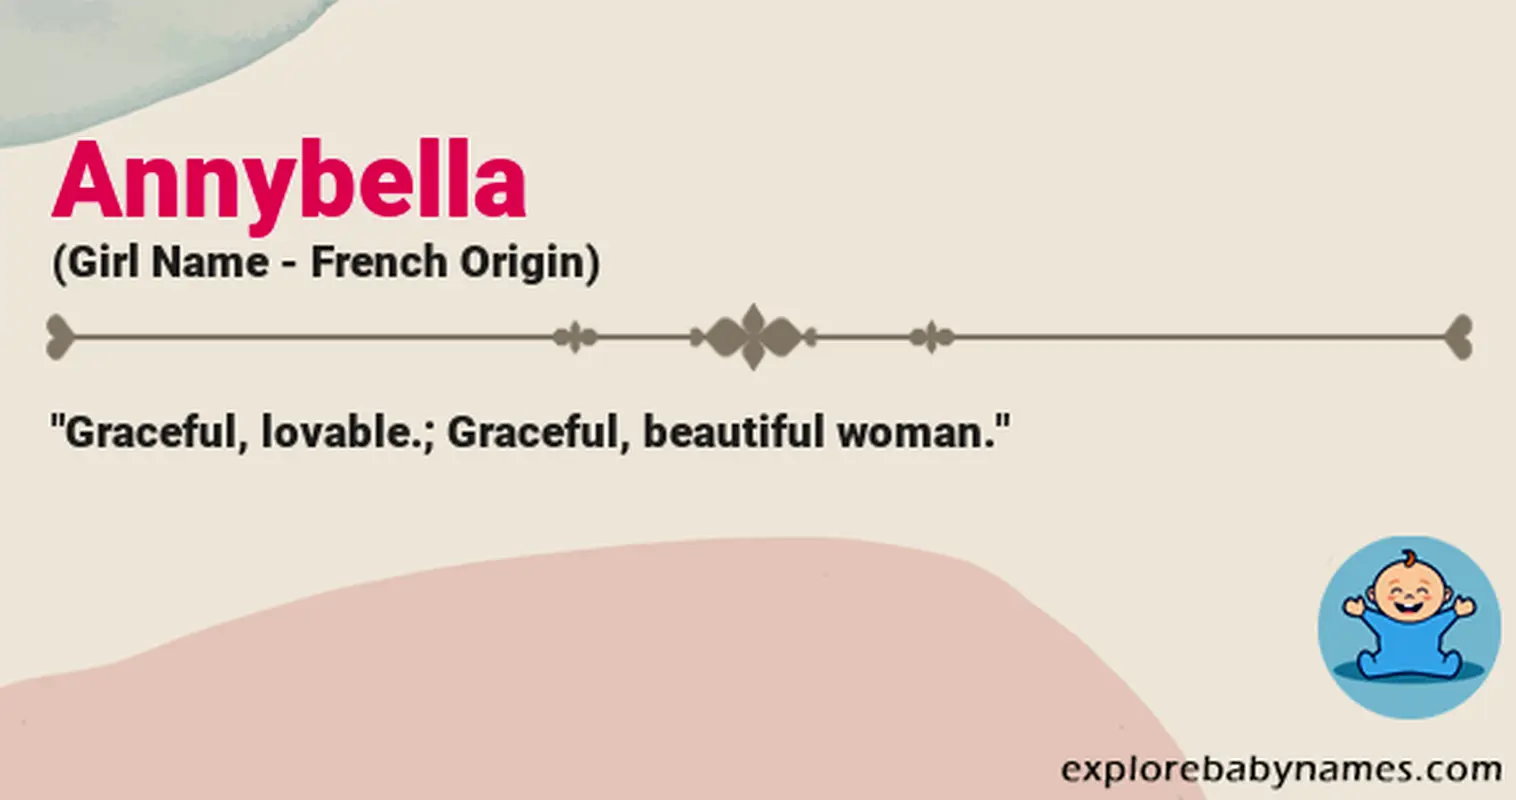 Meaning of Annybella